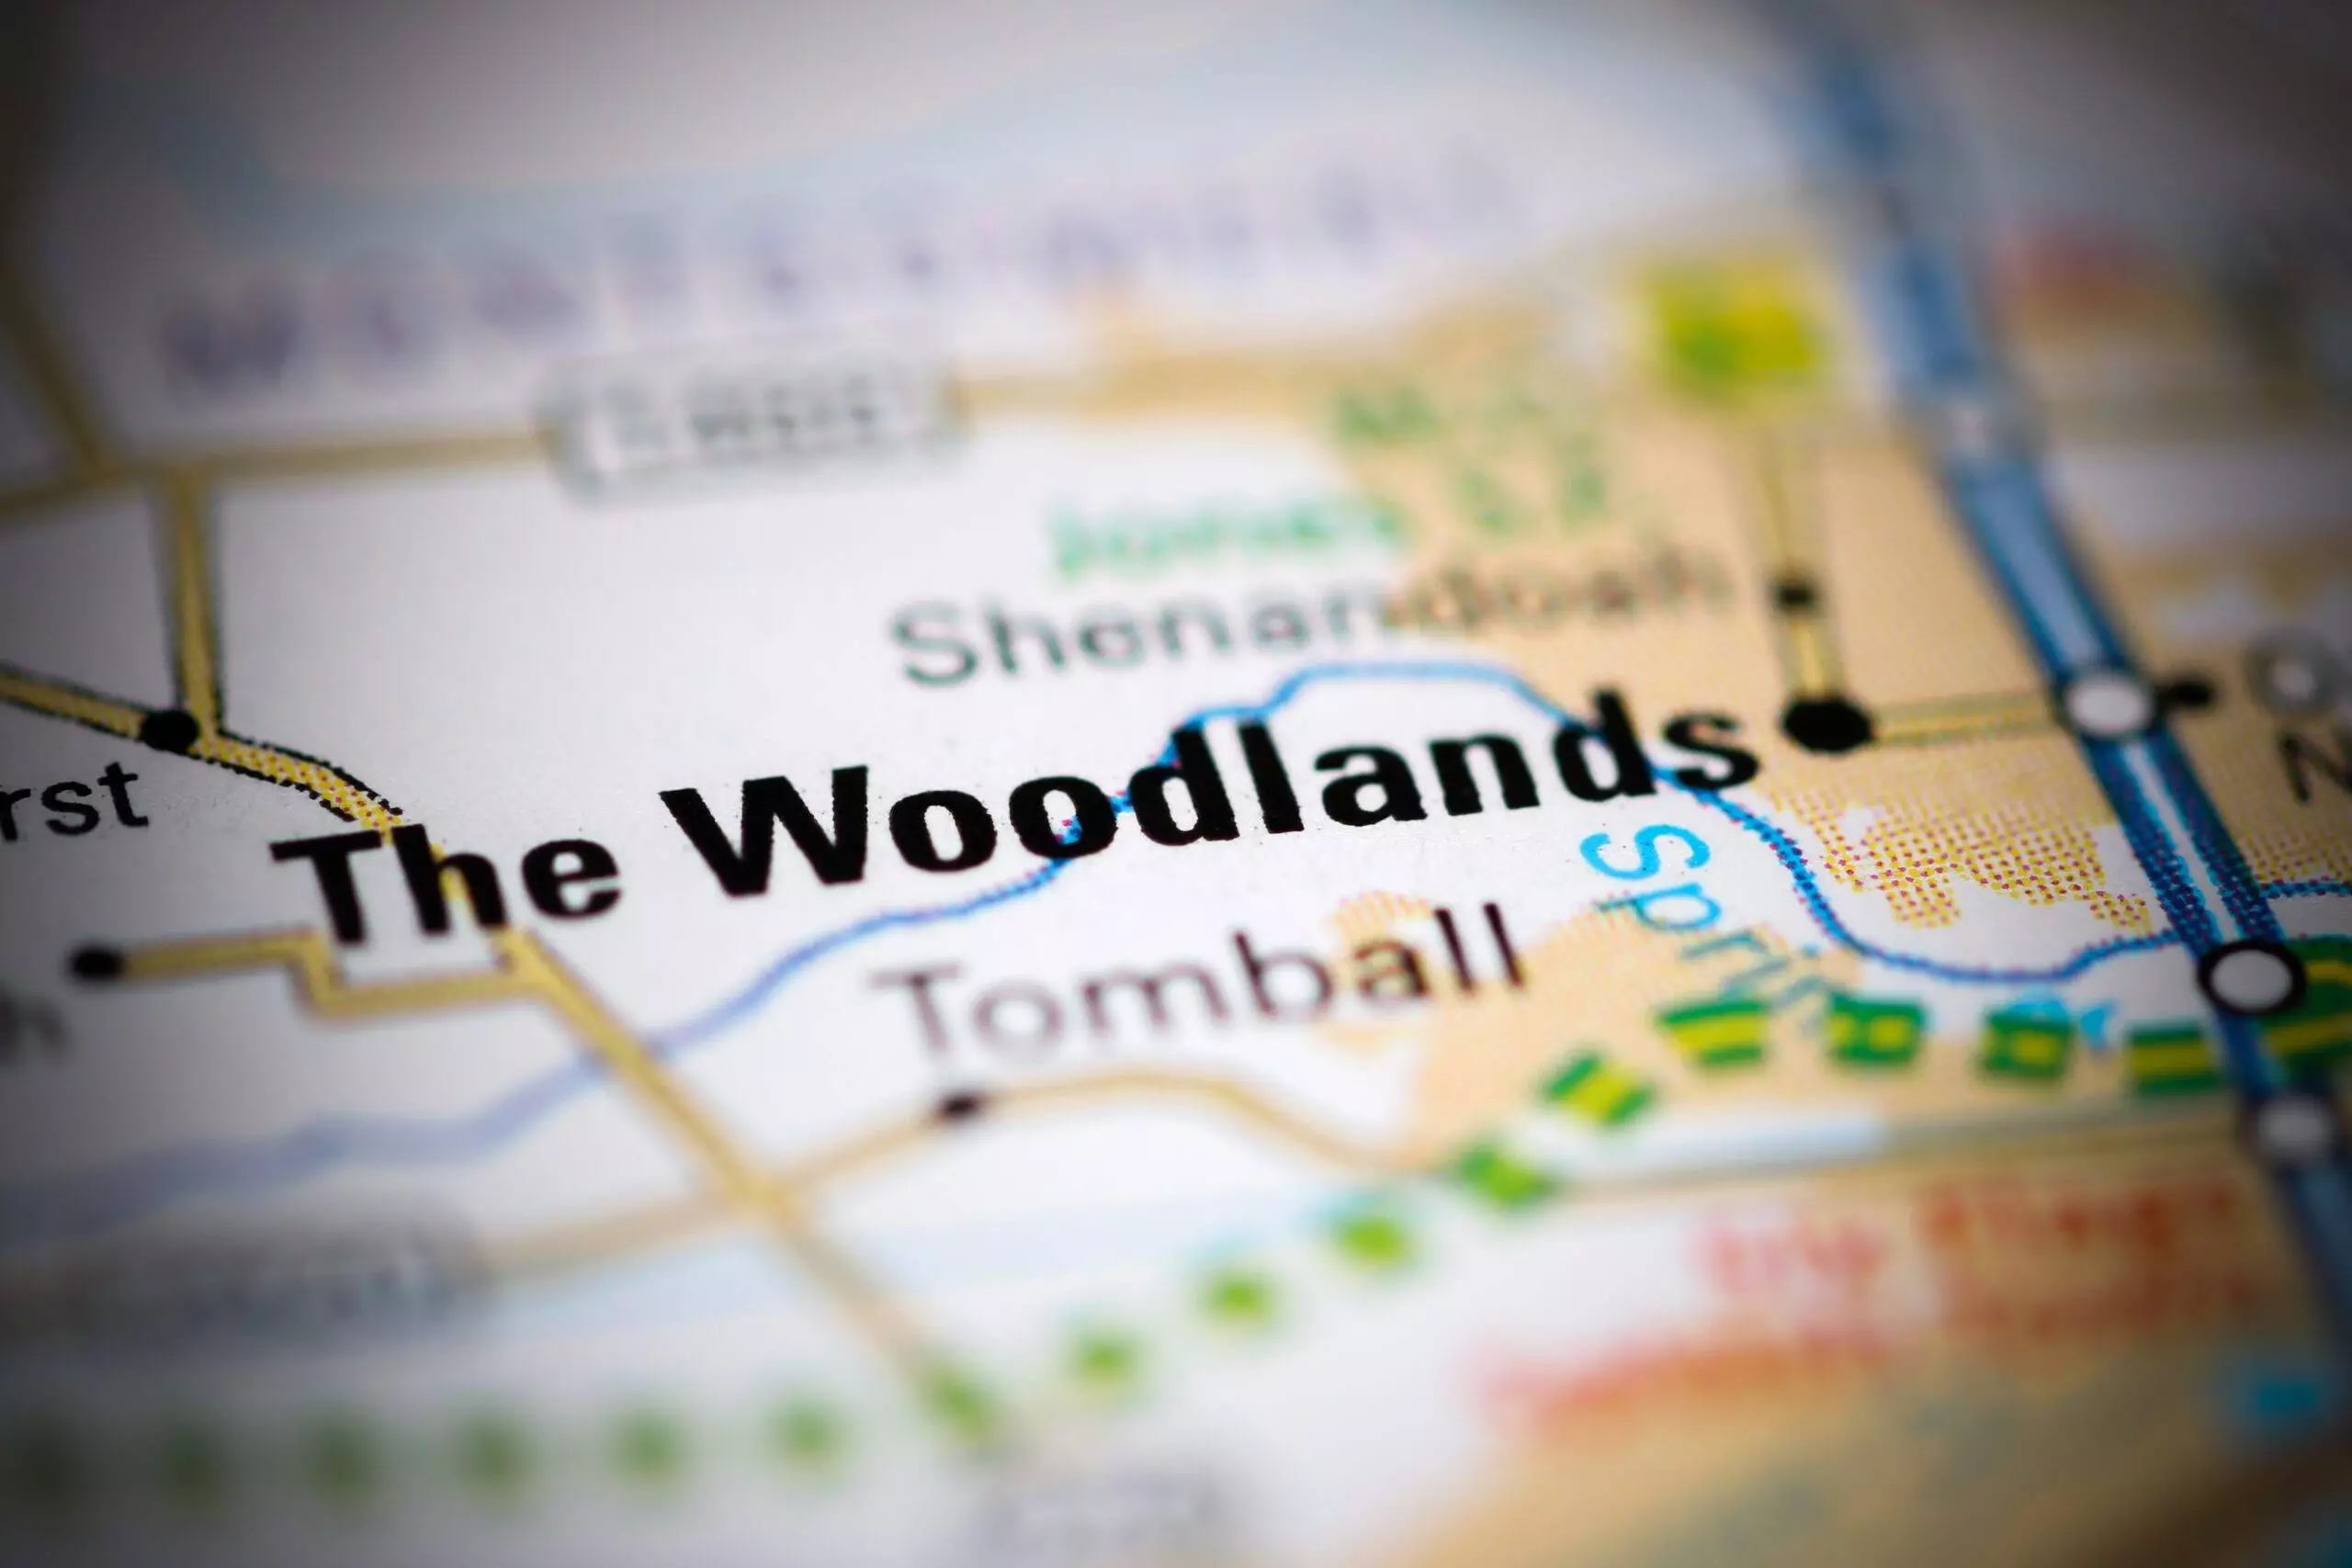 Things to do in the woodlands